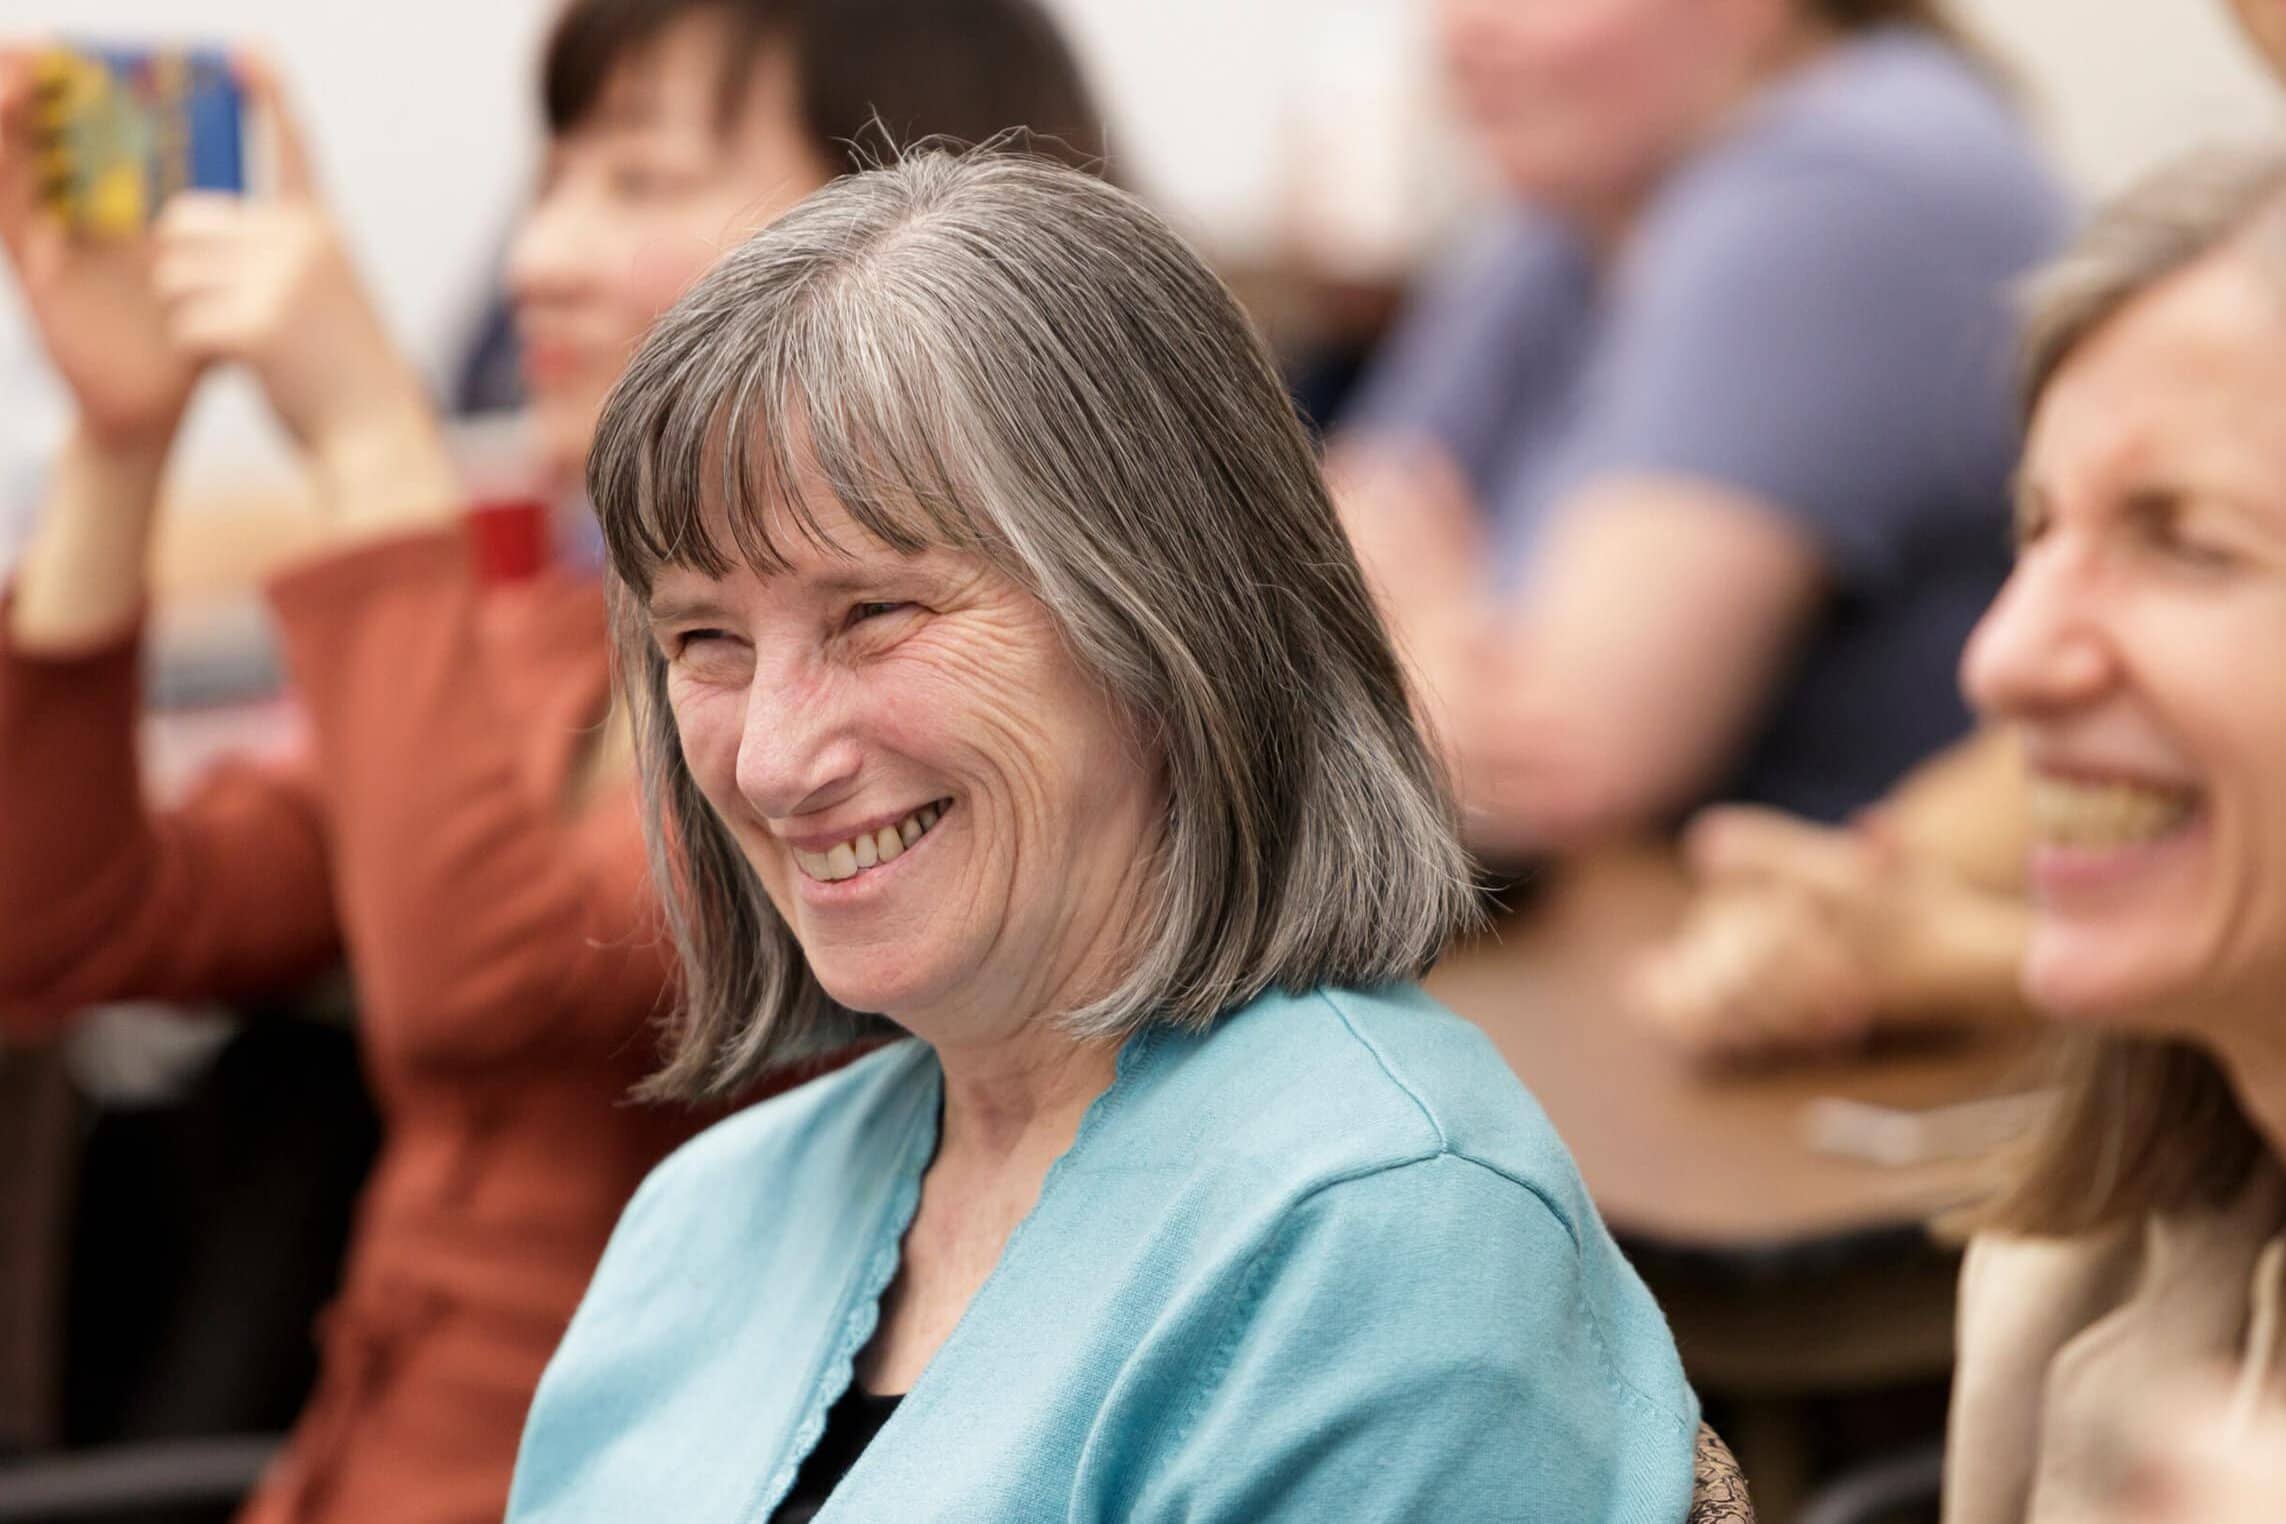 Kathryn Locey smiles during a lecture